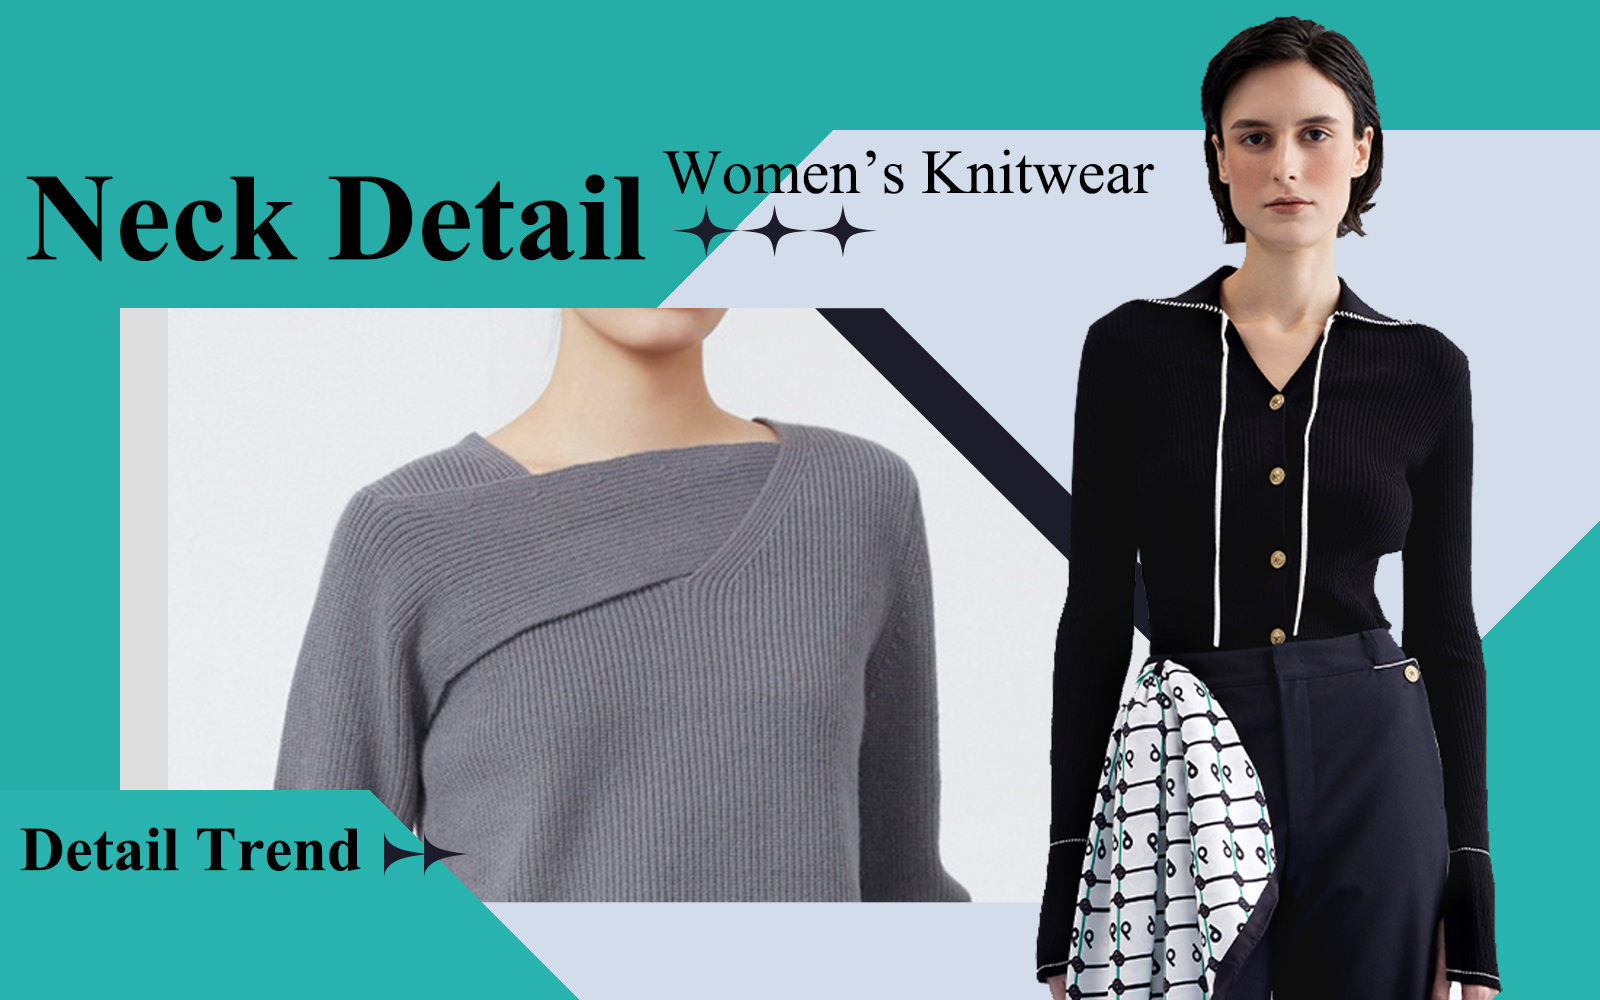 Neck Detail -- The Detail Trend for Women's Knitwear